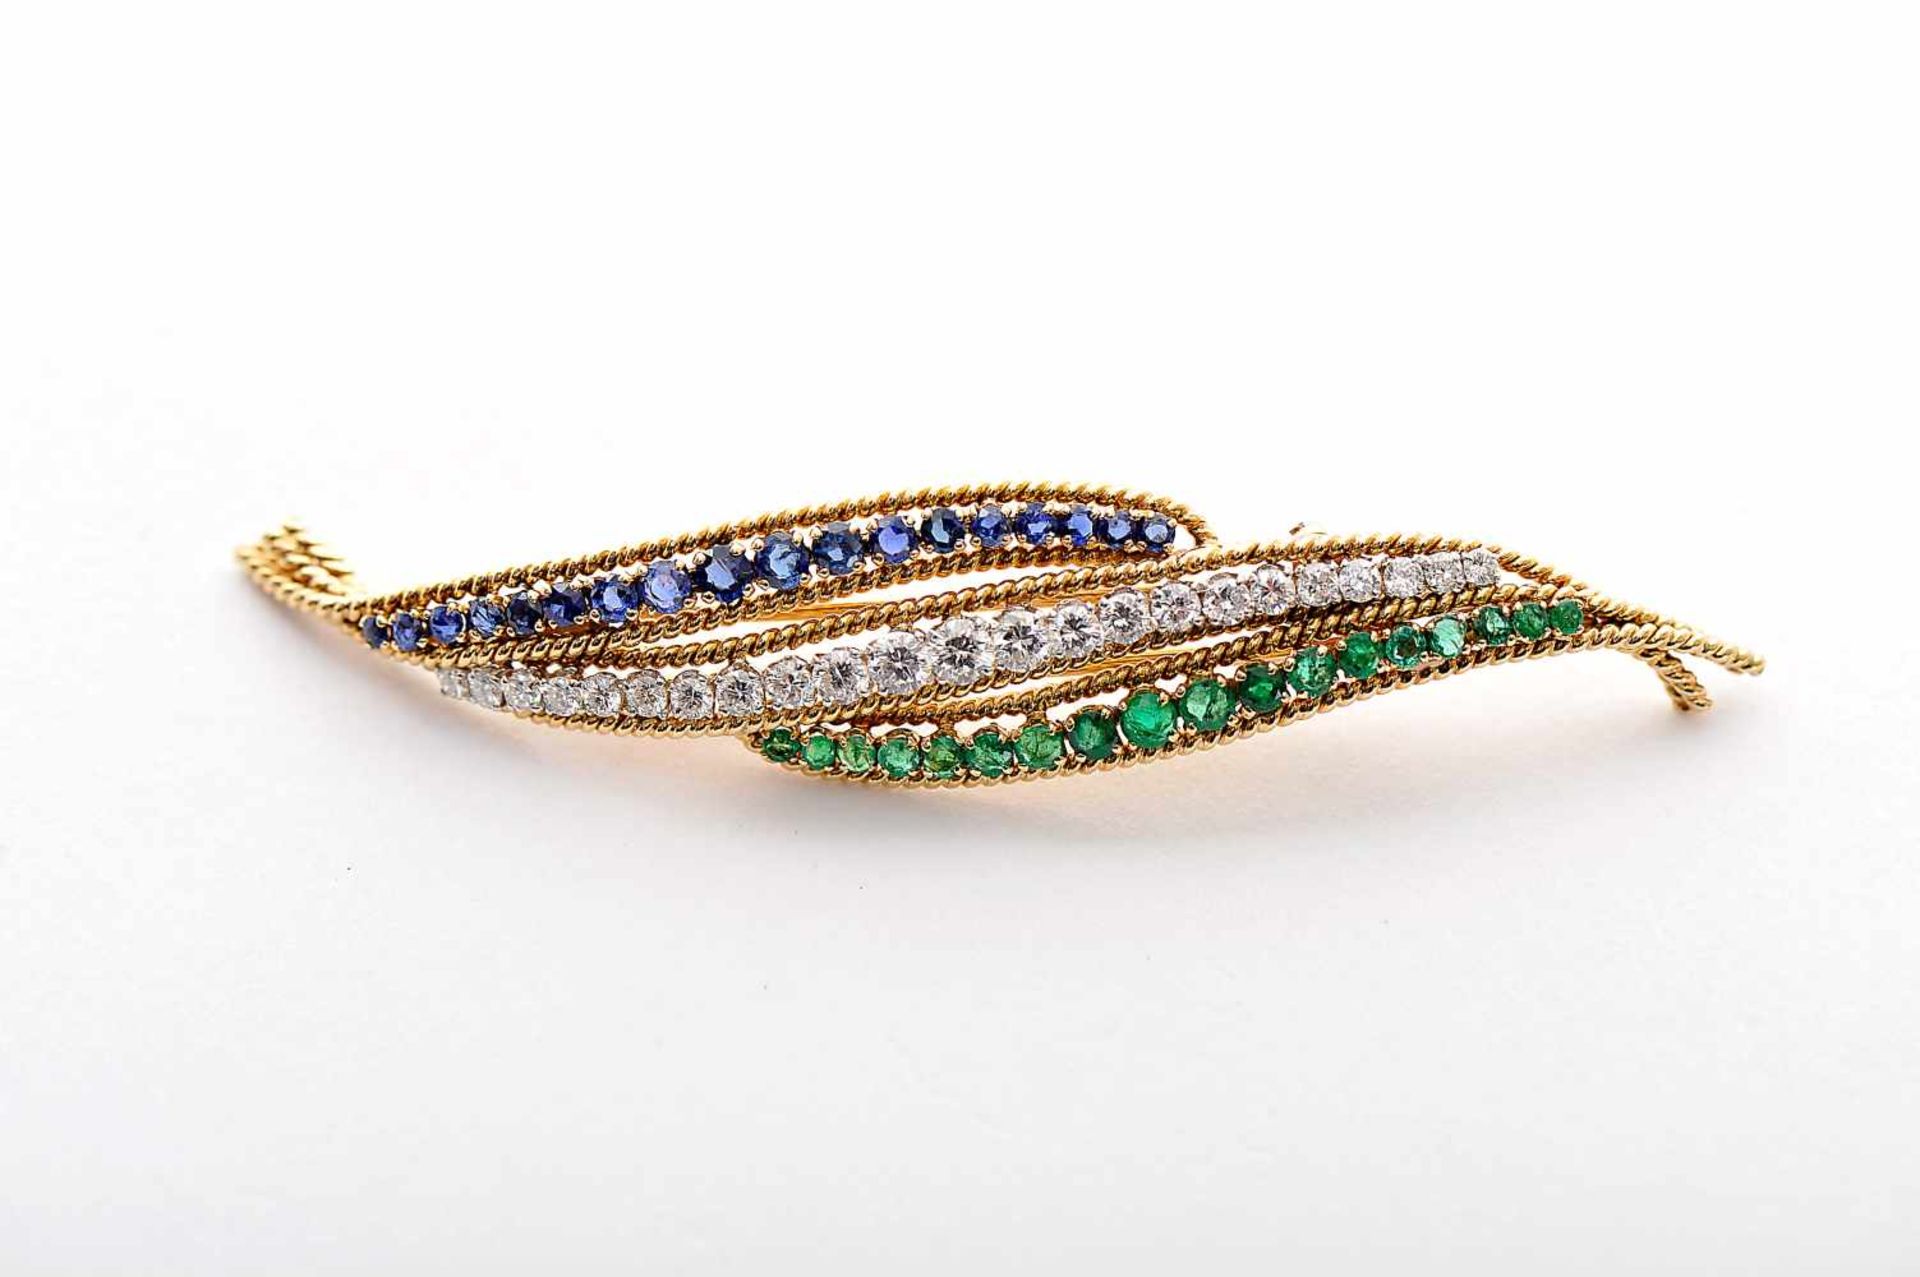 A VAN CLEEF & ARPELS Brooch - Leaf, 750/100 gold, set with 18 emeralds and 18 round brilliant cut